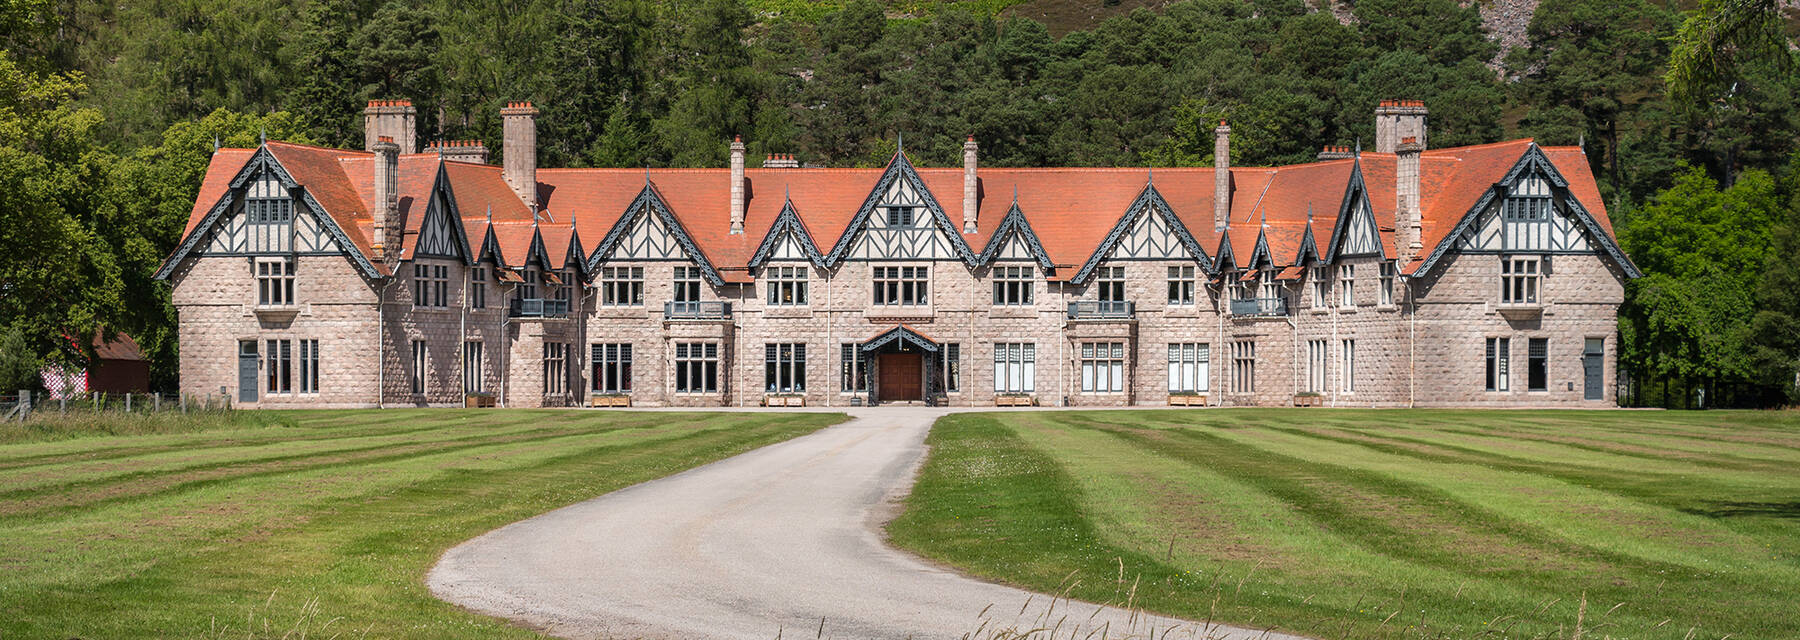 A long and grand two-storey lodge building, with a red-tiled roof, stands with an enormous lawn in front. Behind rises the steep slopes of a heather-covered mountain.